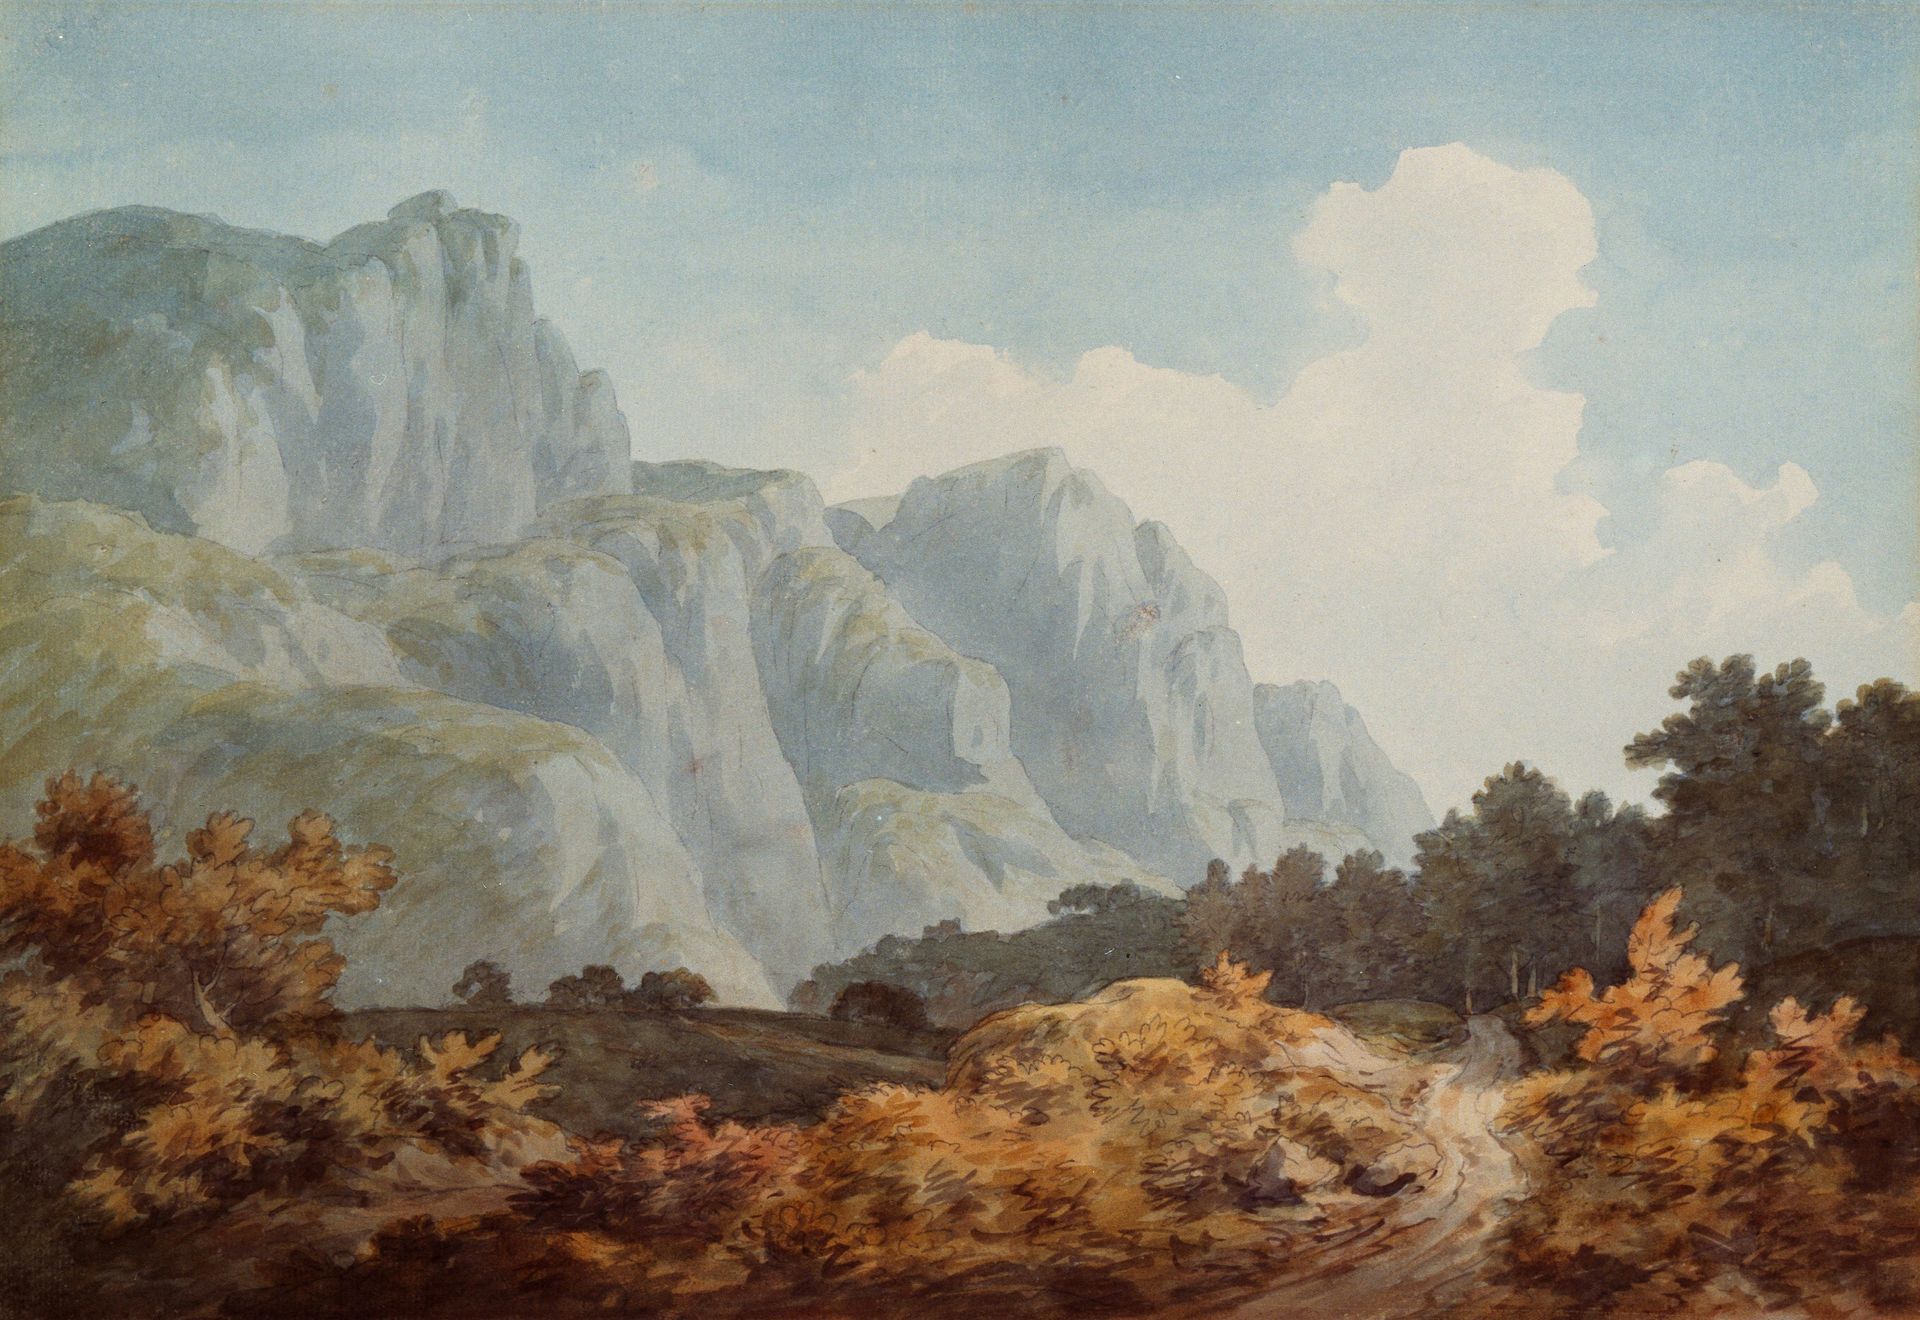 Mountains in the distance of a landscape painting